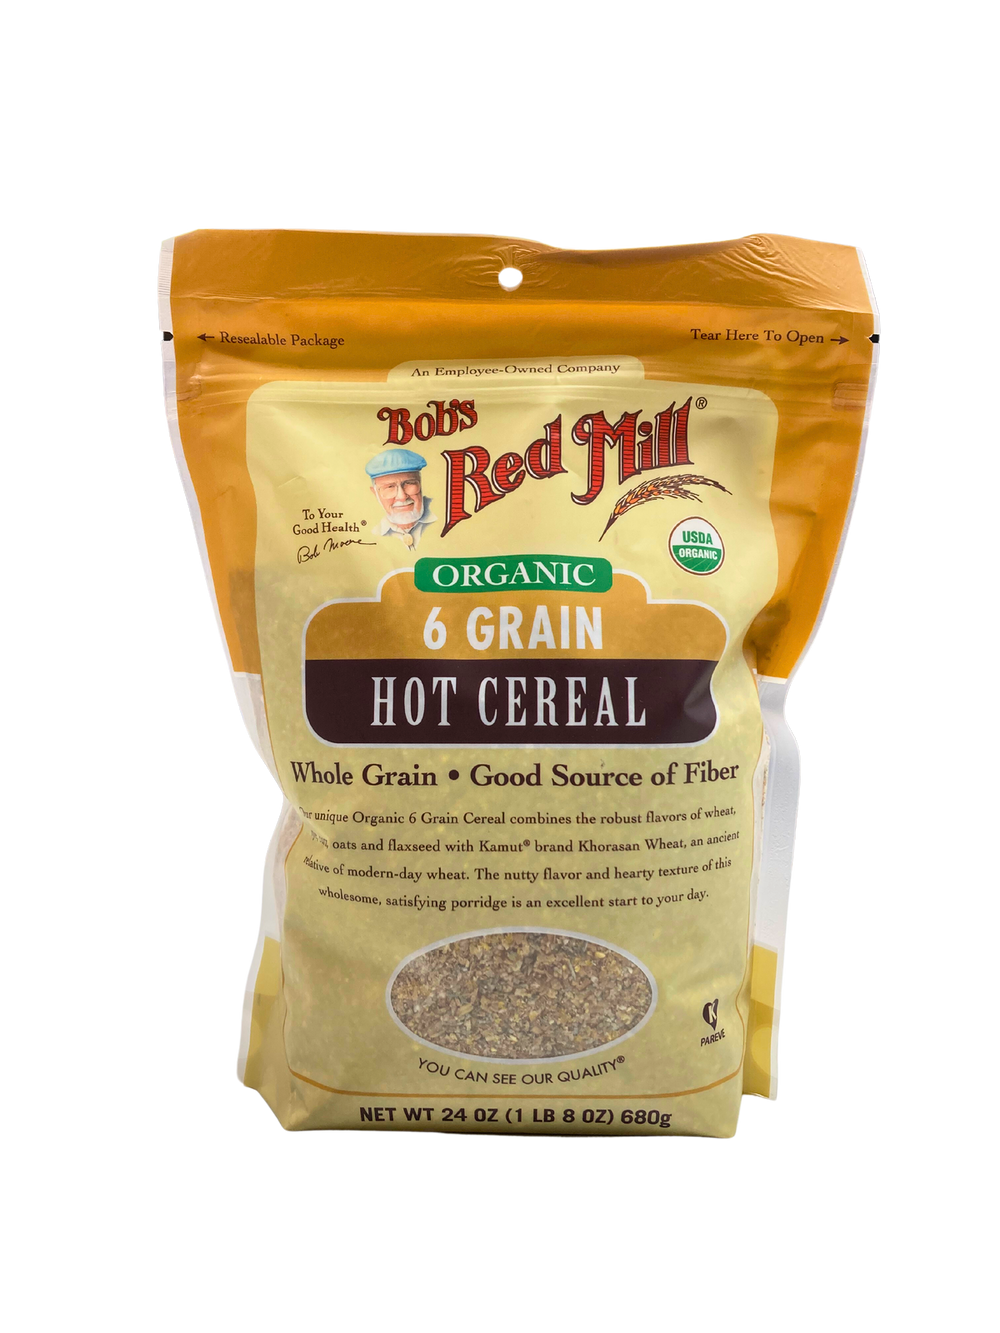 Organic 6-Grain Hot Cereal, BRM - Country Life Natural Foods